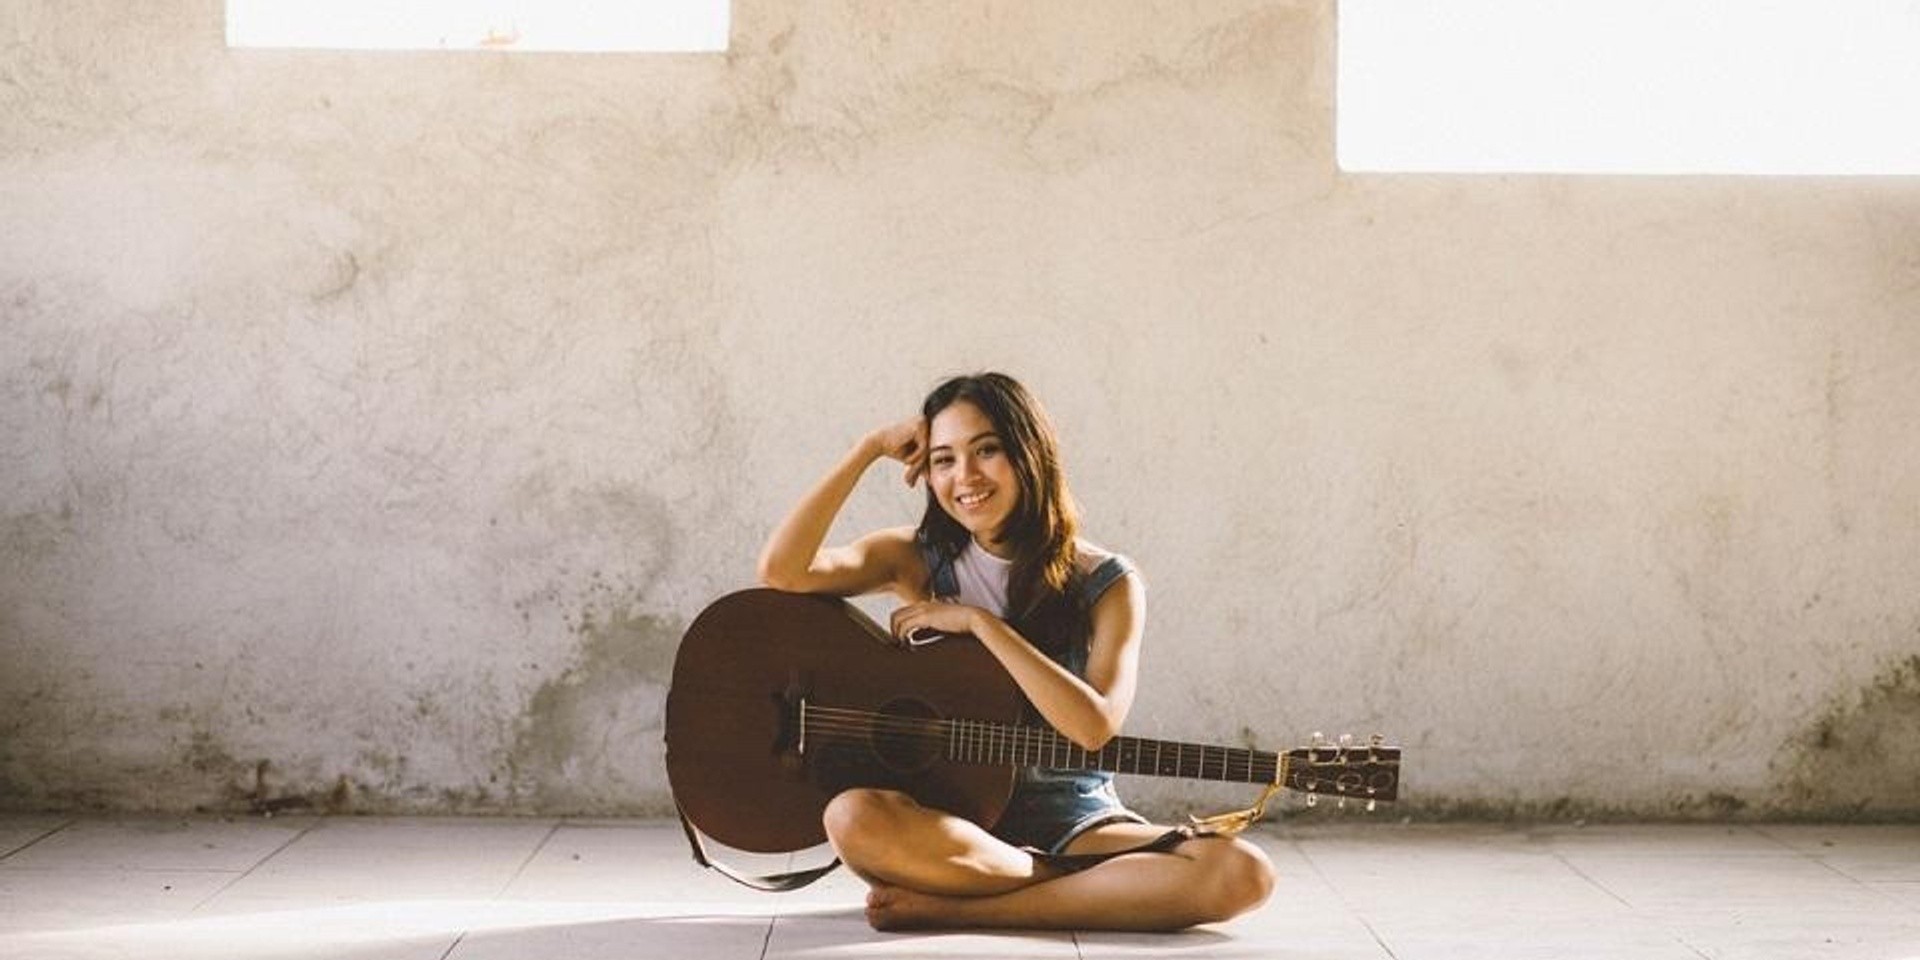 Clara Benin releases new track, 'Parallel Universe', stream it on Spotify